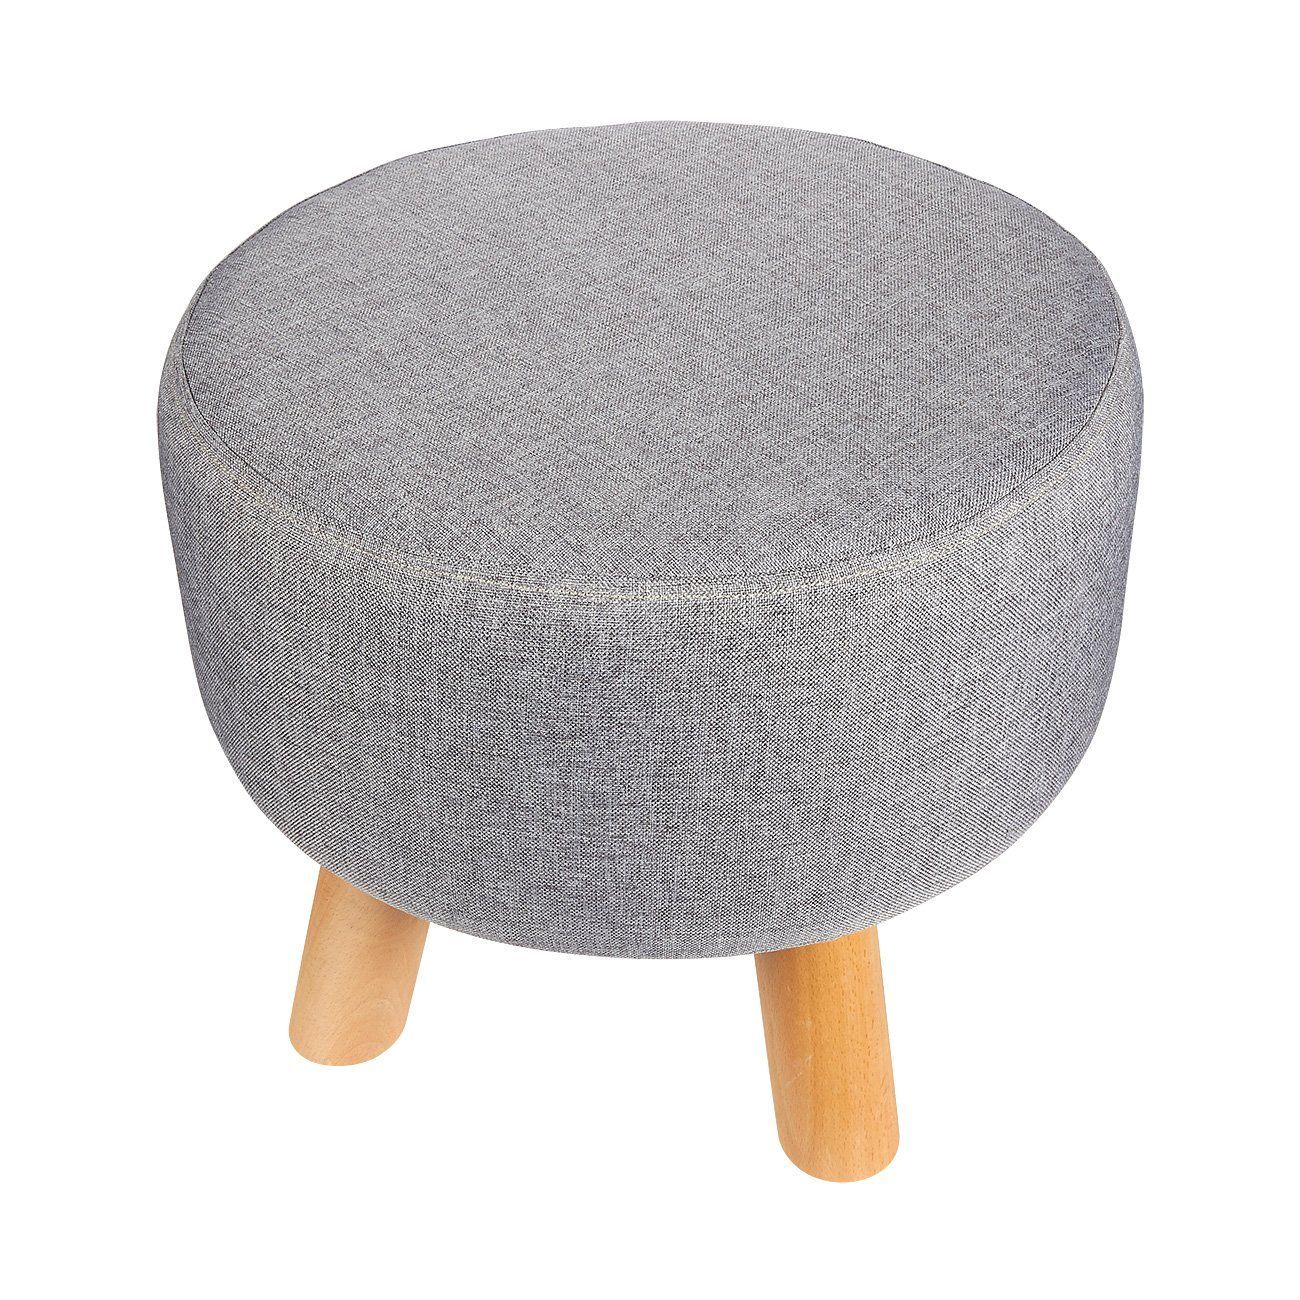 Ottoman Footstool Round Pouf Ottoman Foot Stool Foot Rest With Inside Cream Linen And Fir Wood Round Ottomans (View 2 of 20)